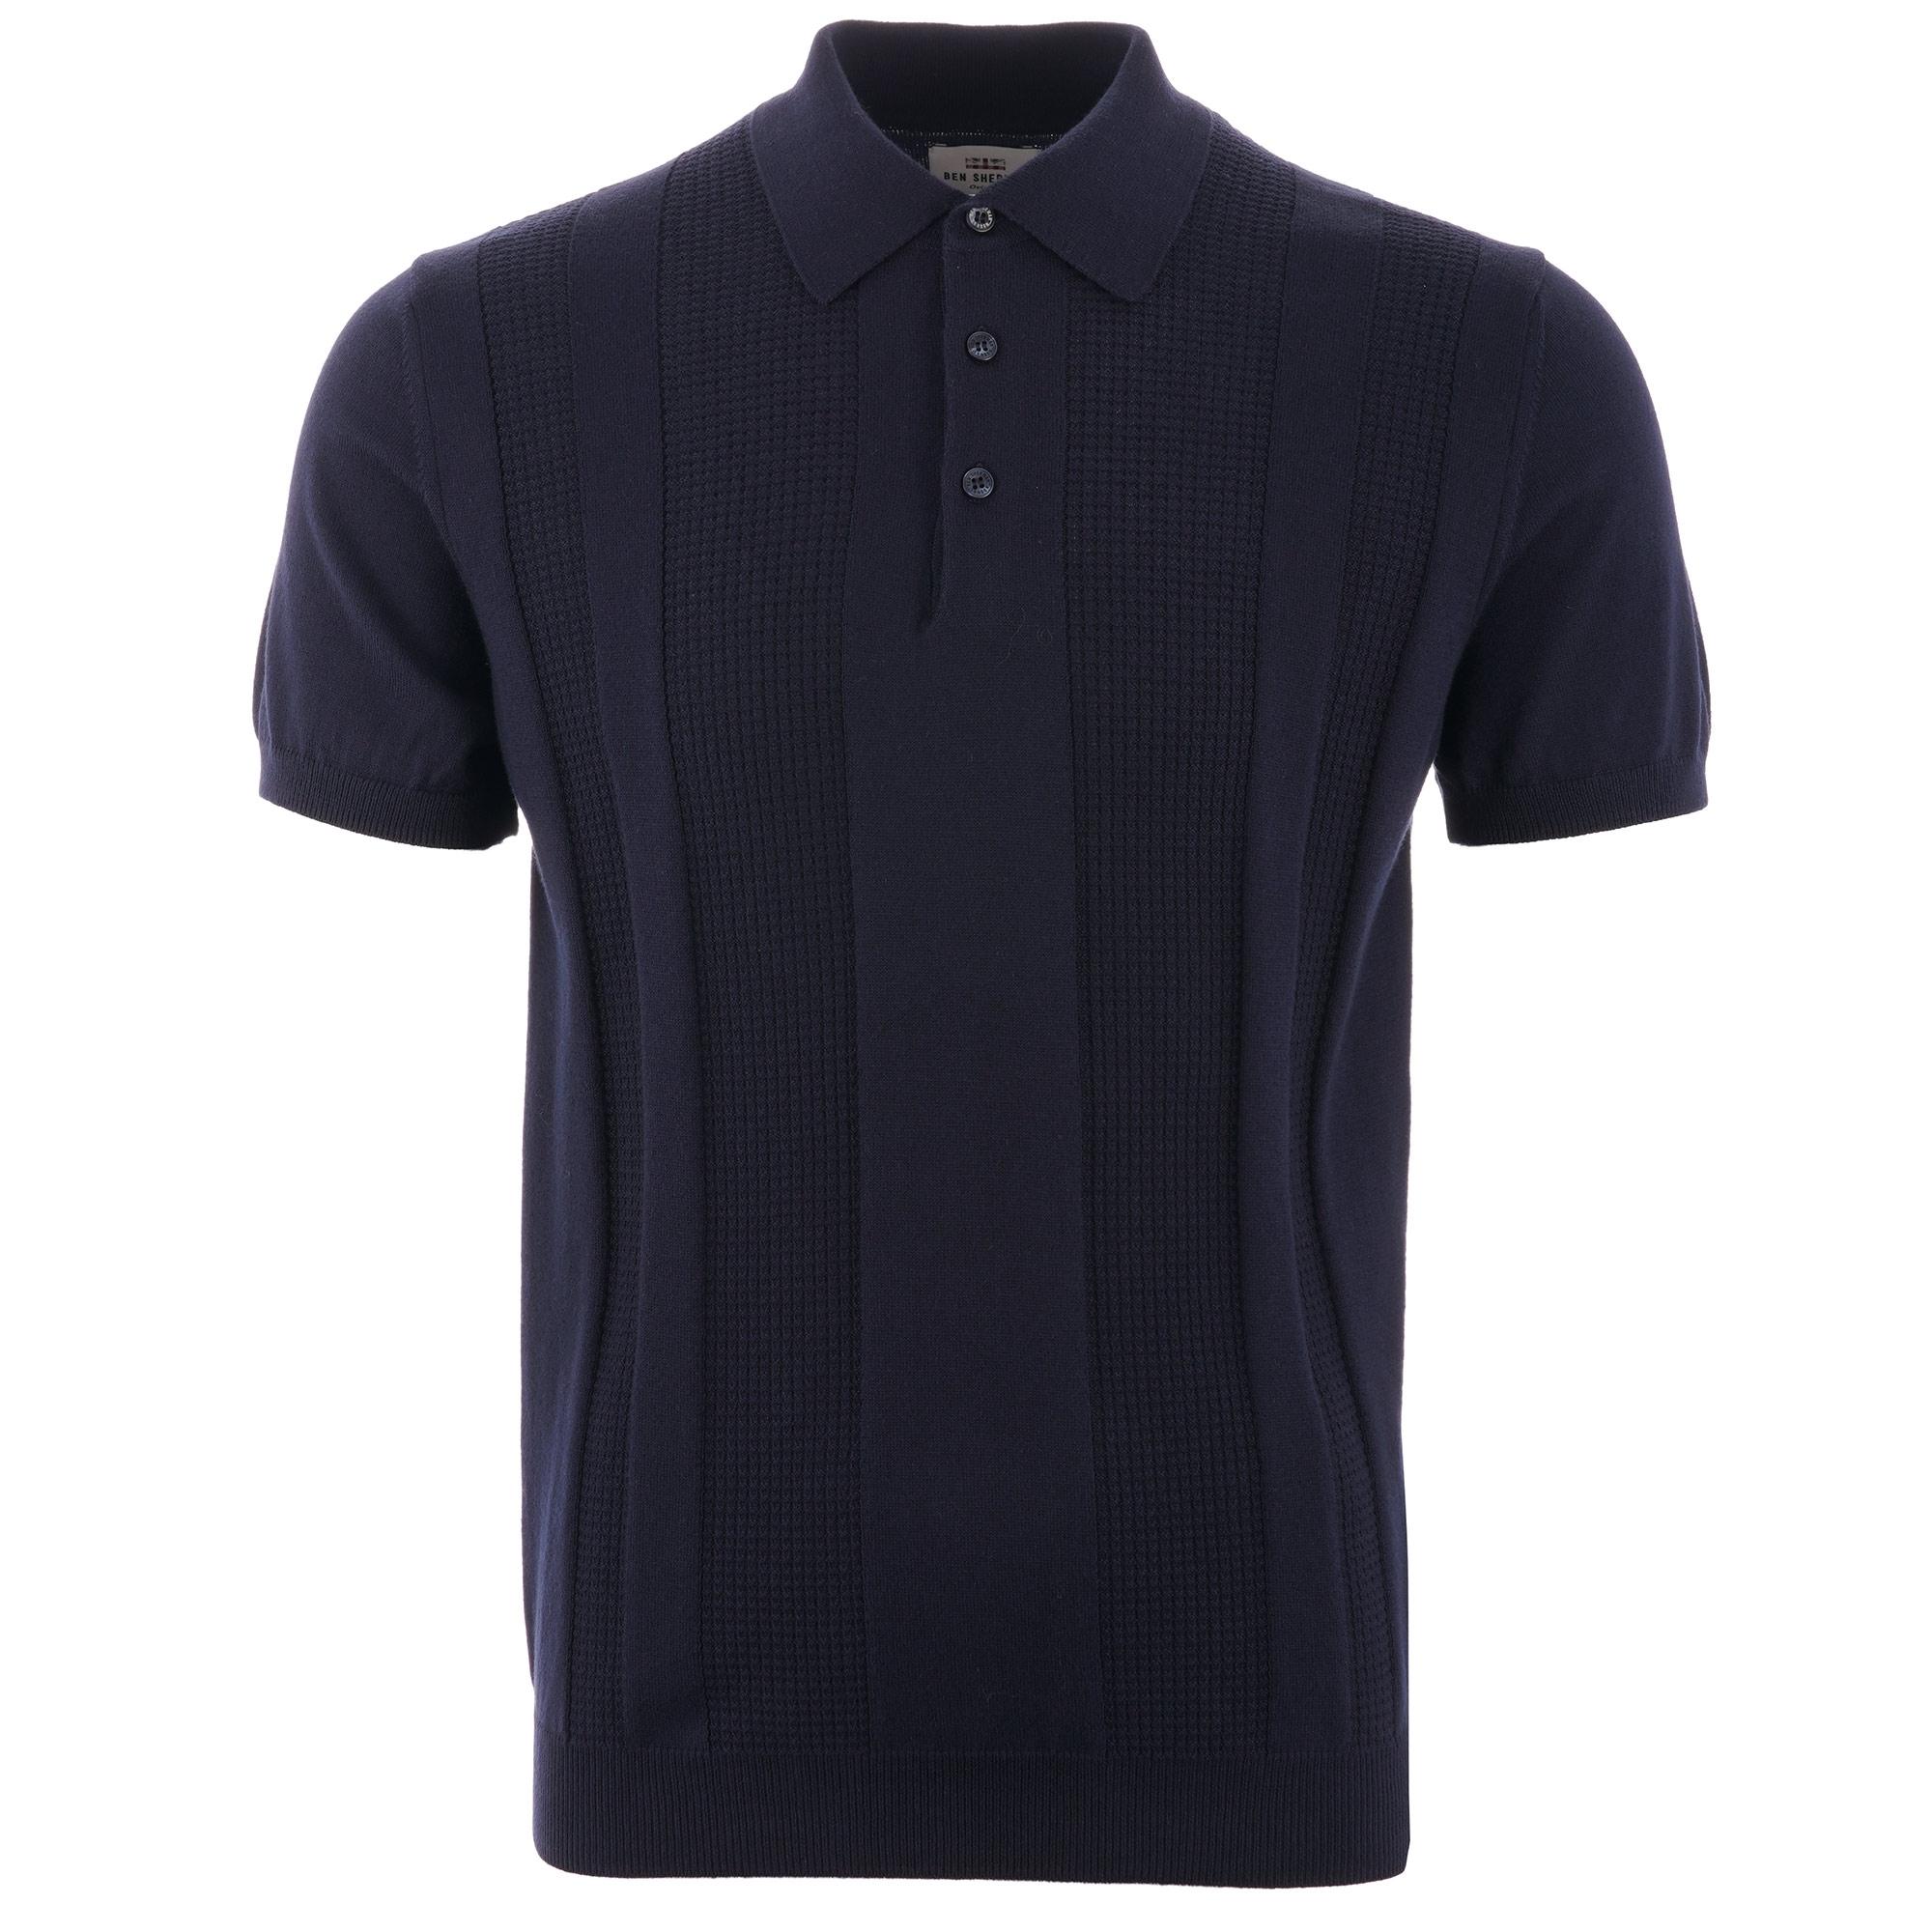 Lyst - Ben Sherman Textured Stripe Front Polo Shirt - Navy in Blue for Men